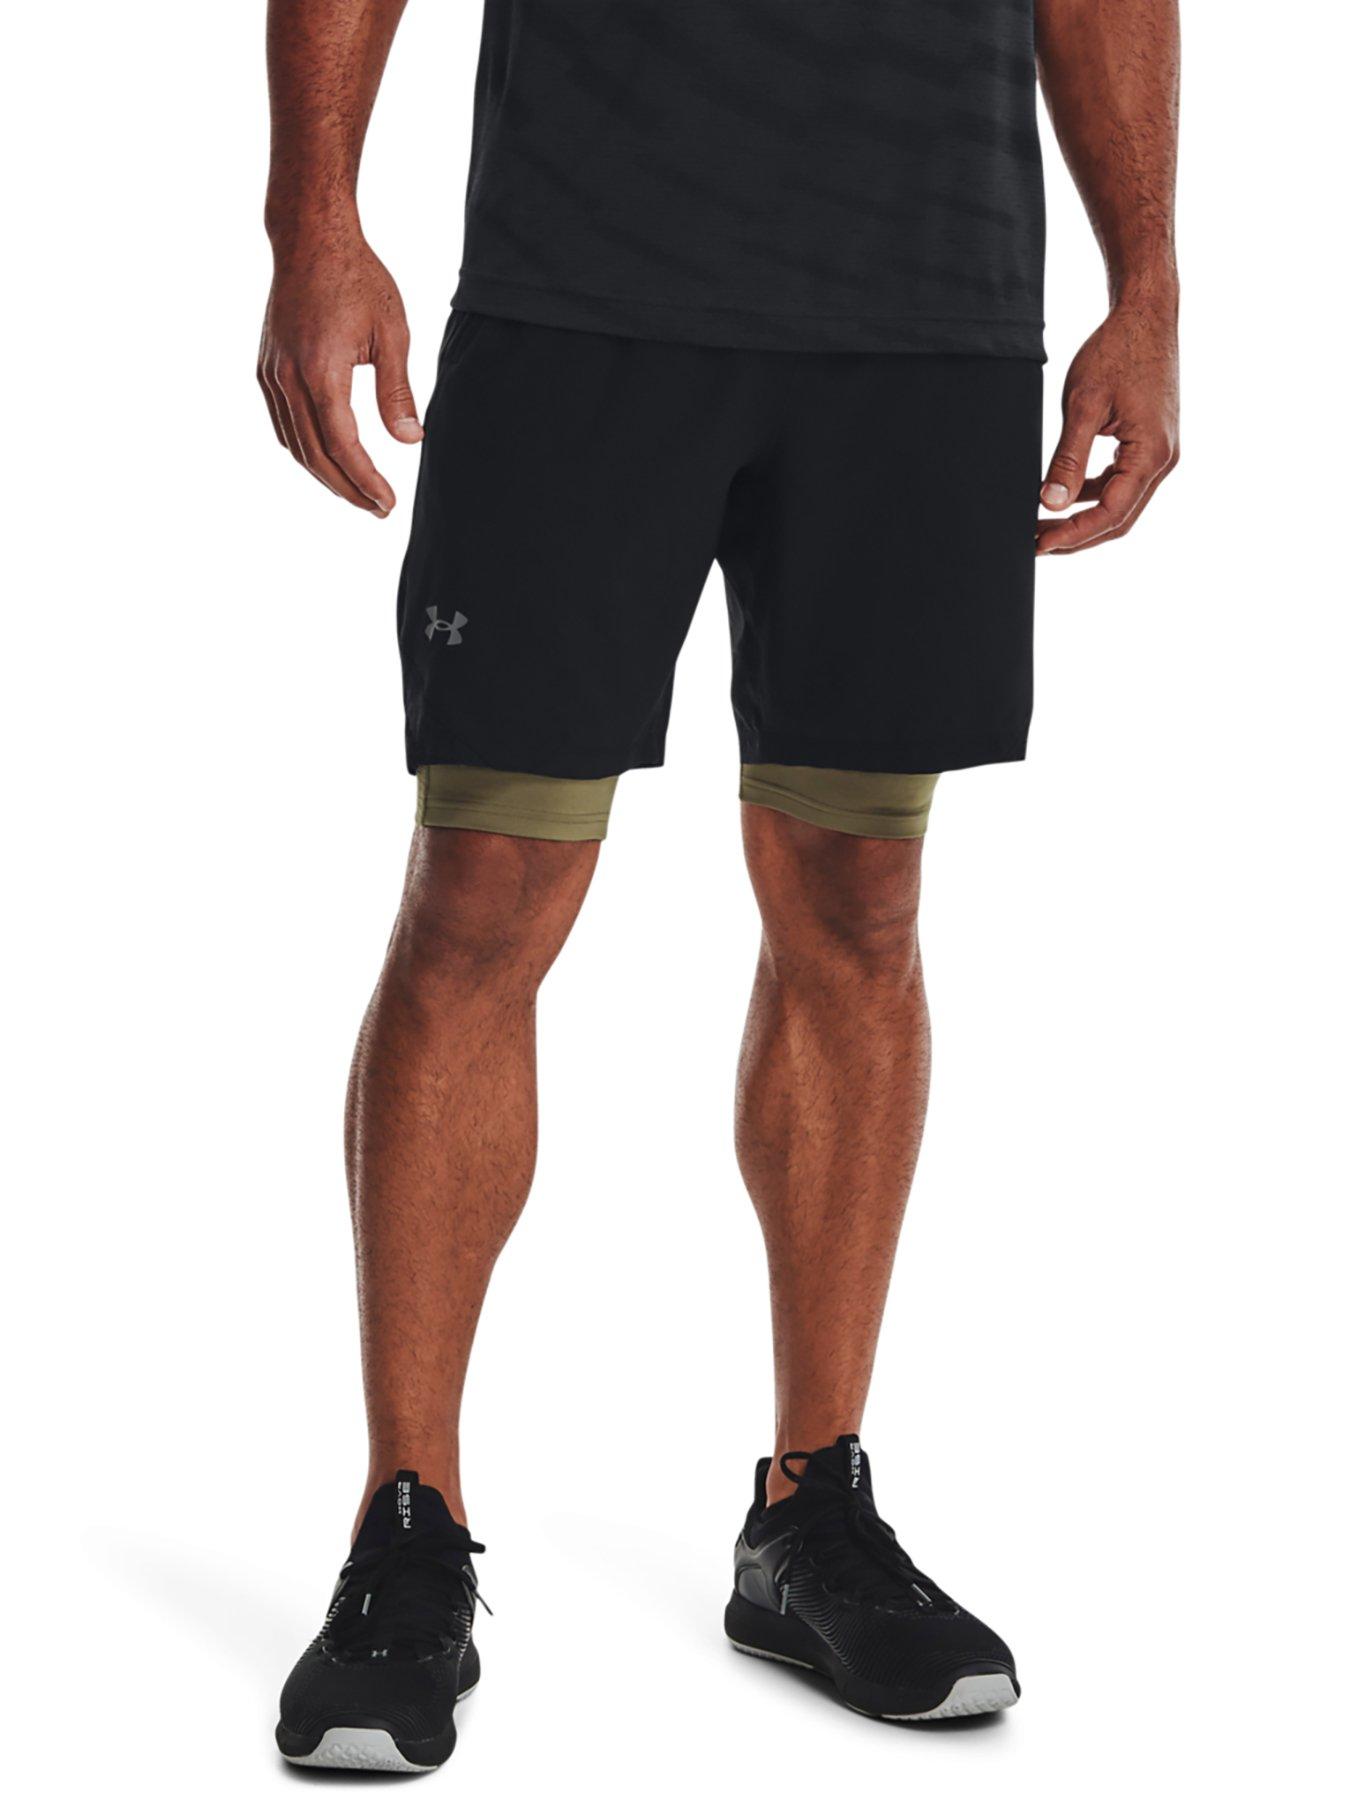 Under Armour Mens Vanish Woven 8 Inch Light Training Workout Shorts - Grey